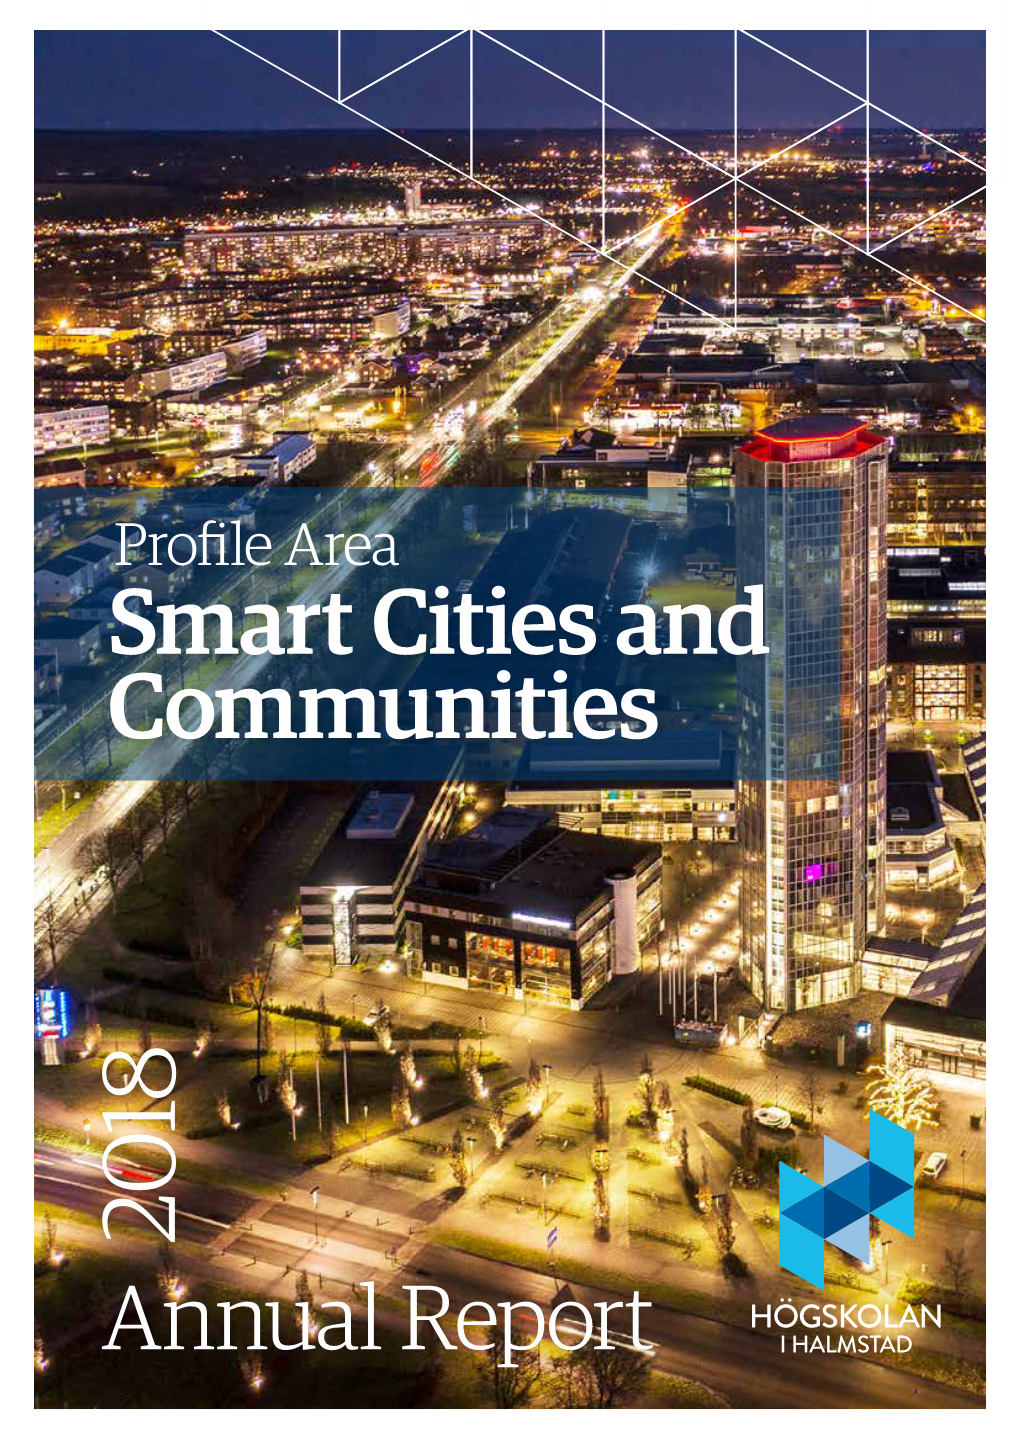 Smart Cities and Communities 2018 Annual Report